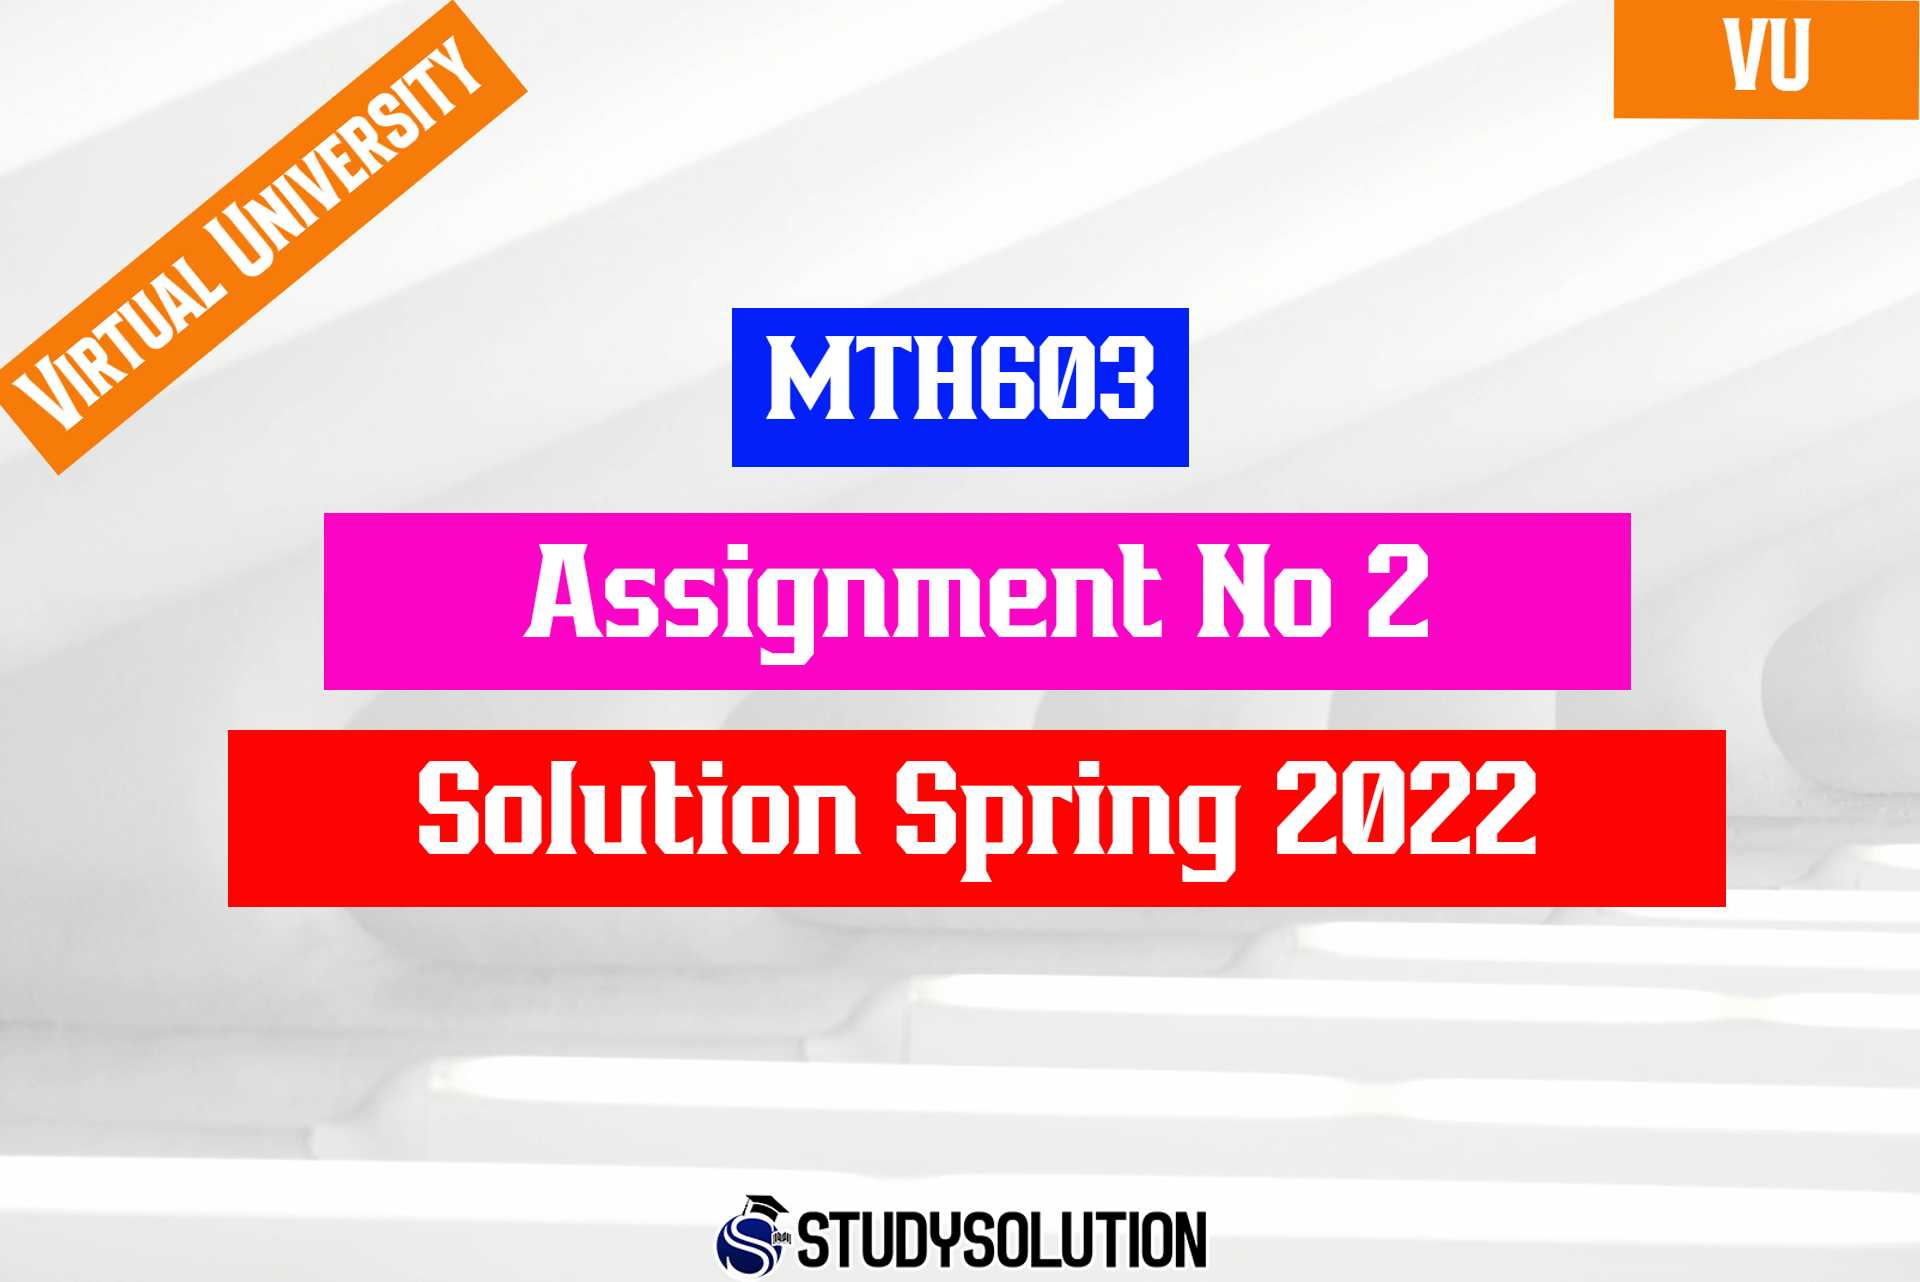 MTH603 Assignment No 2 Solution Spring 2022